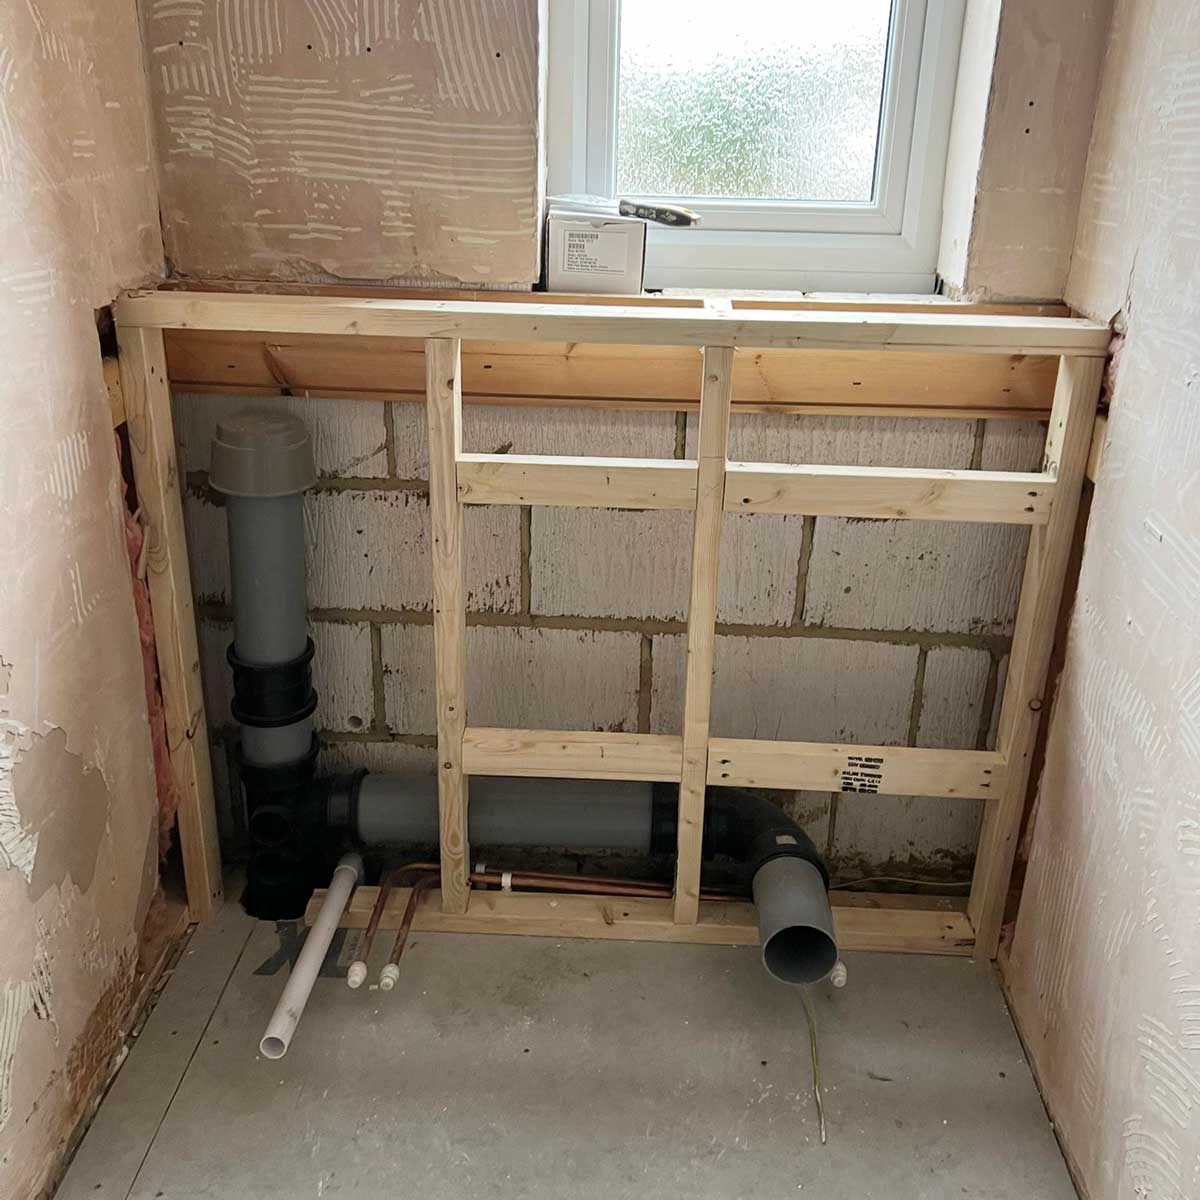 New studwork and plumbing installed by Room H2o as psrt of an ensuite bathroom refurbishment in Dorset